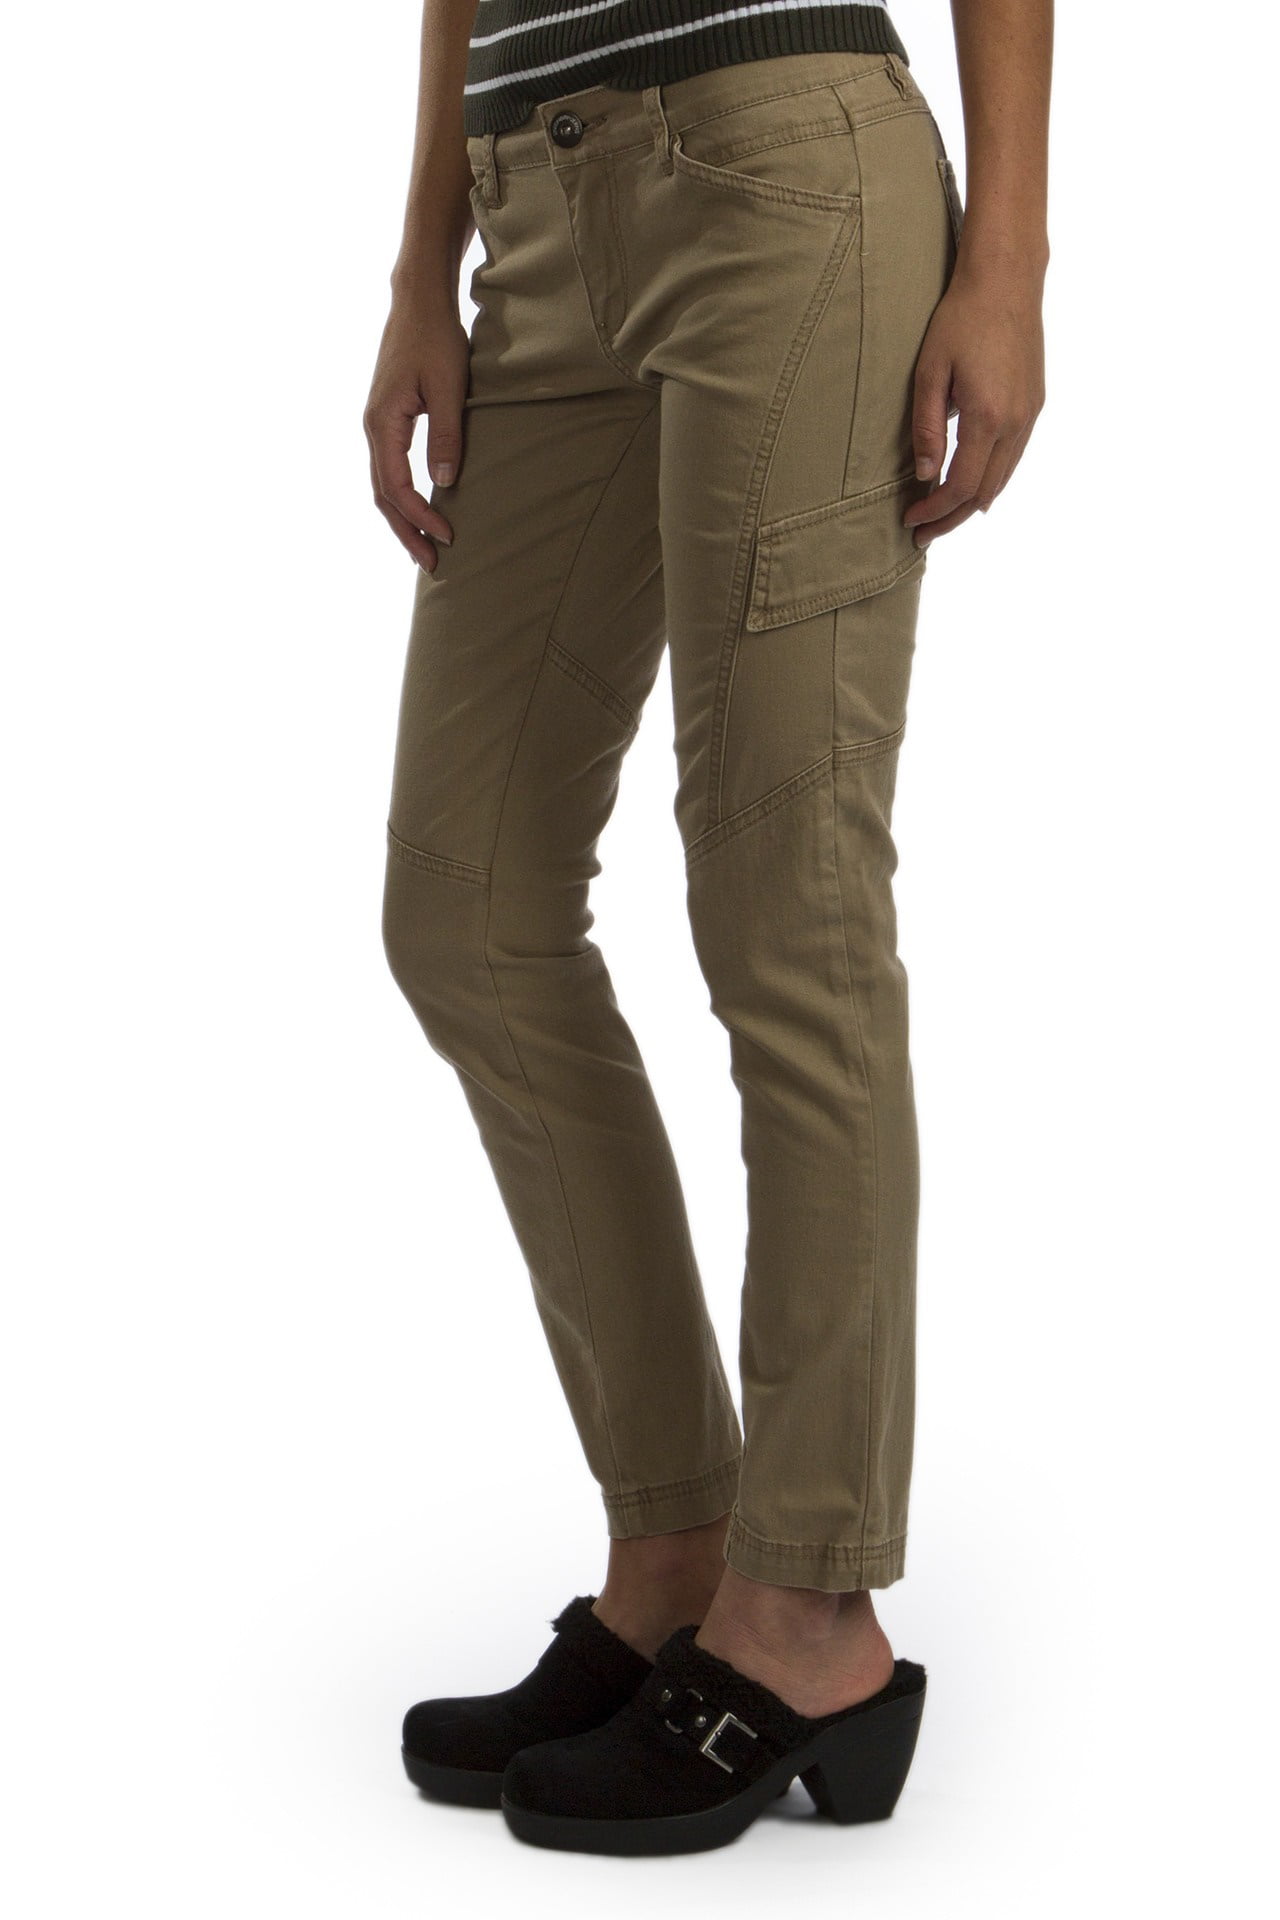 Supplies by Union Bay Ladies Cargo Pants Army Green 